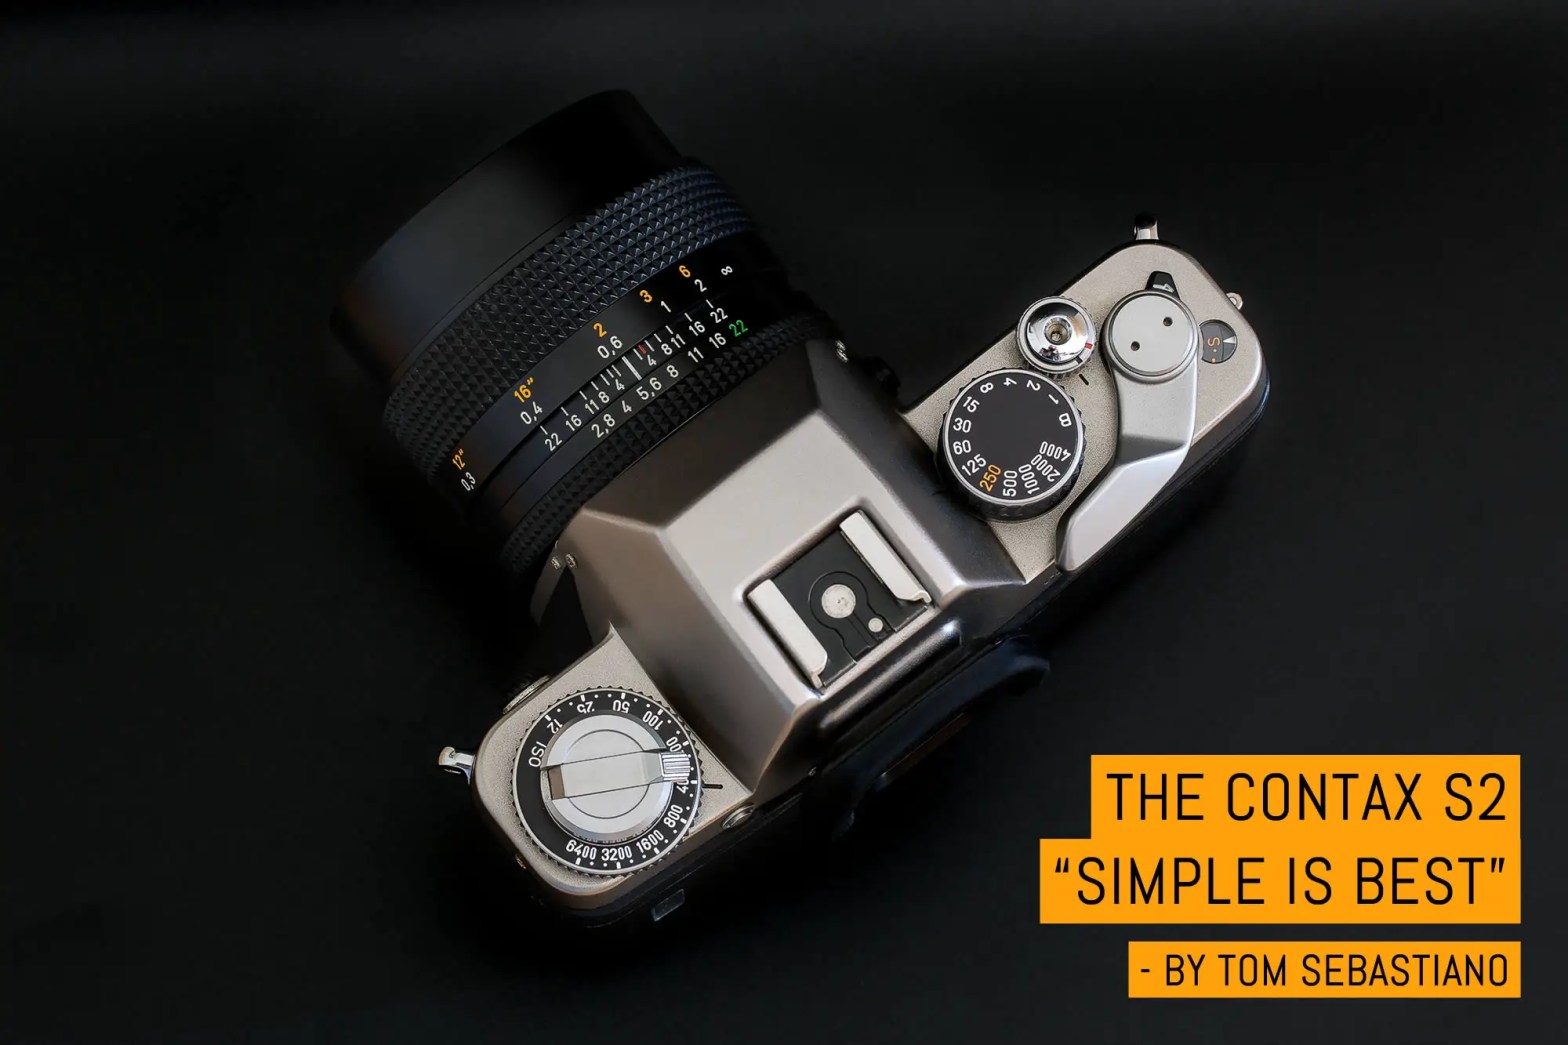 Camera review: the Contax S2, “Simple is Best”